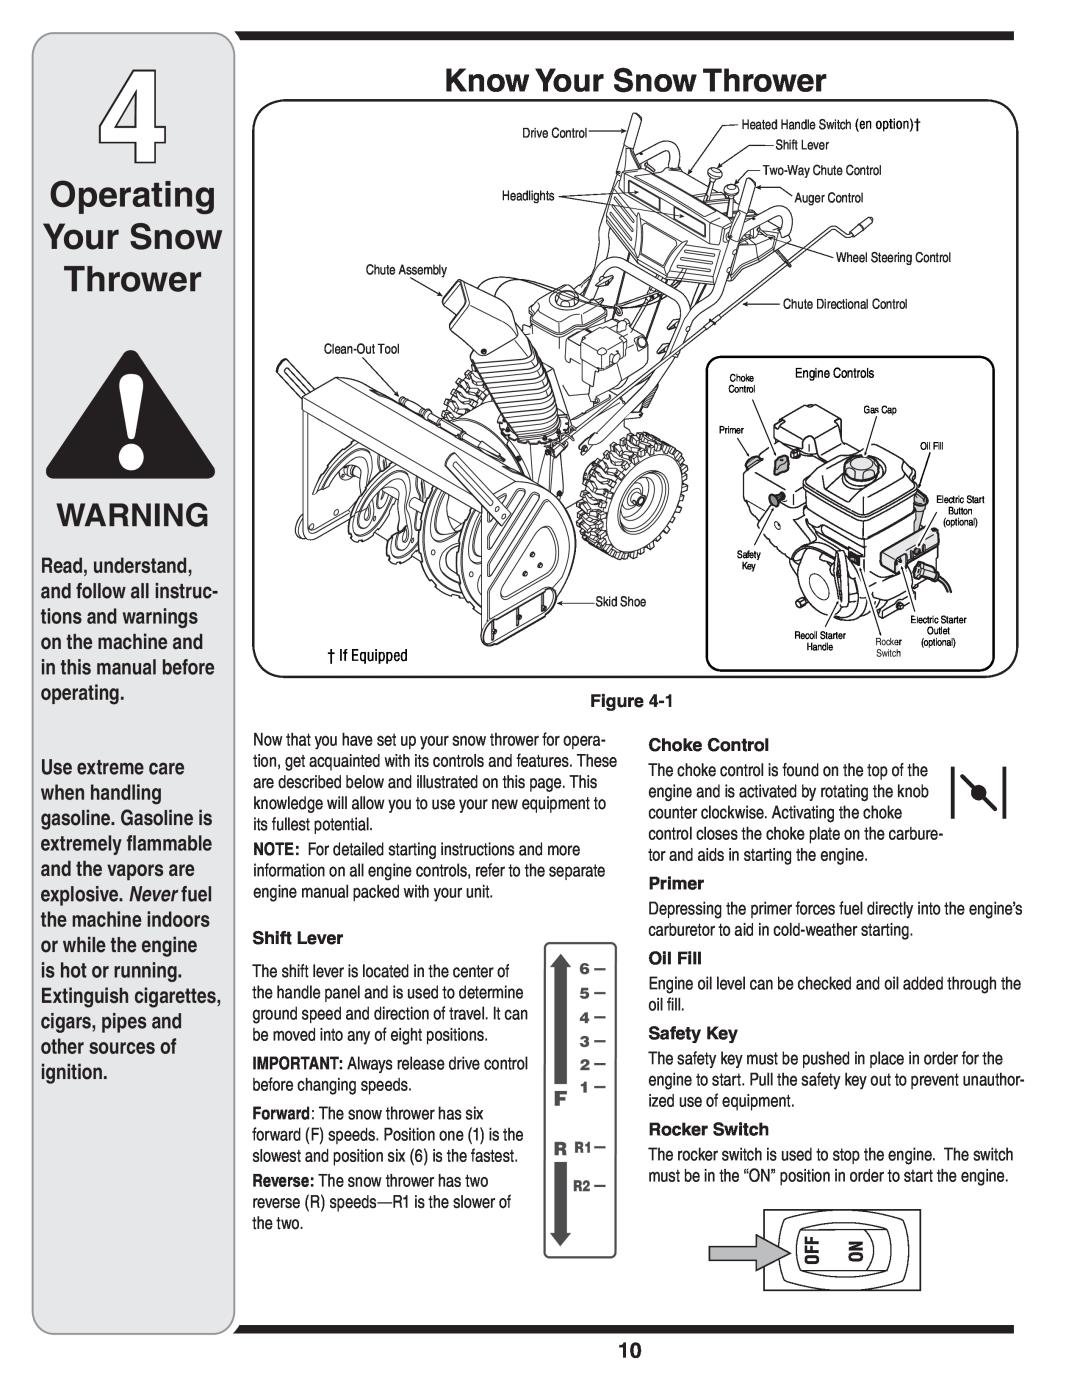 MTD 769-04101 Operating Your Snow Thrower, Know Your Snow Thrower, R R1, Shift Lever, be moved into any of eight positions 